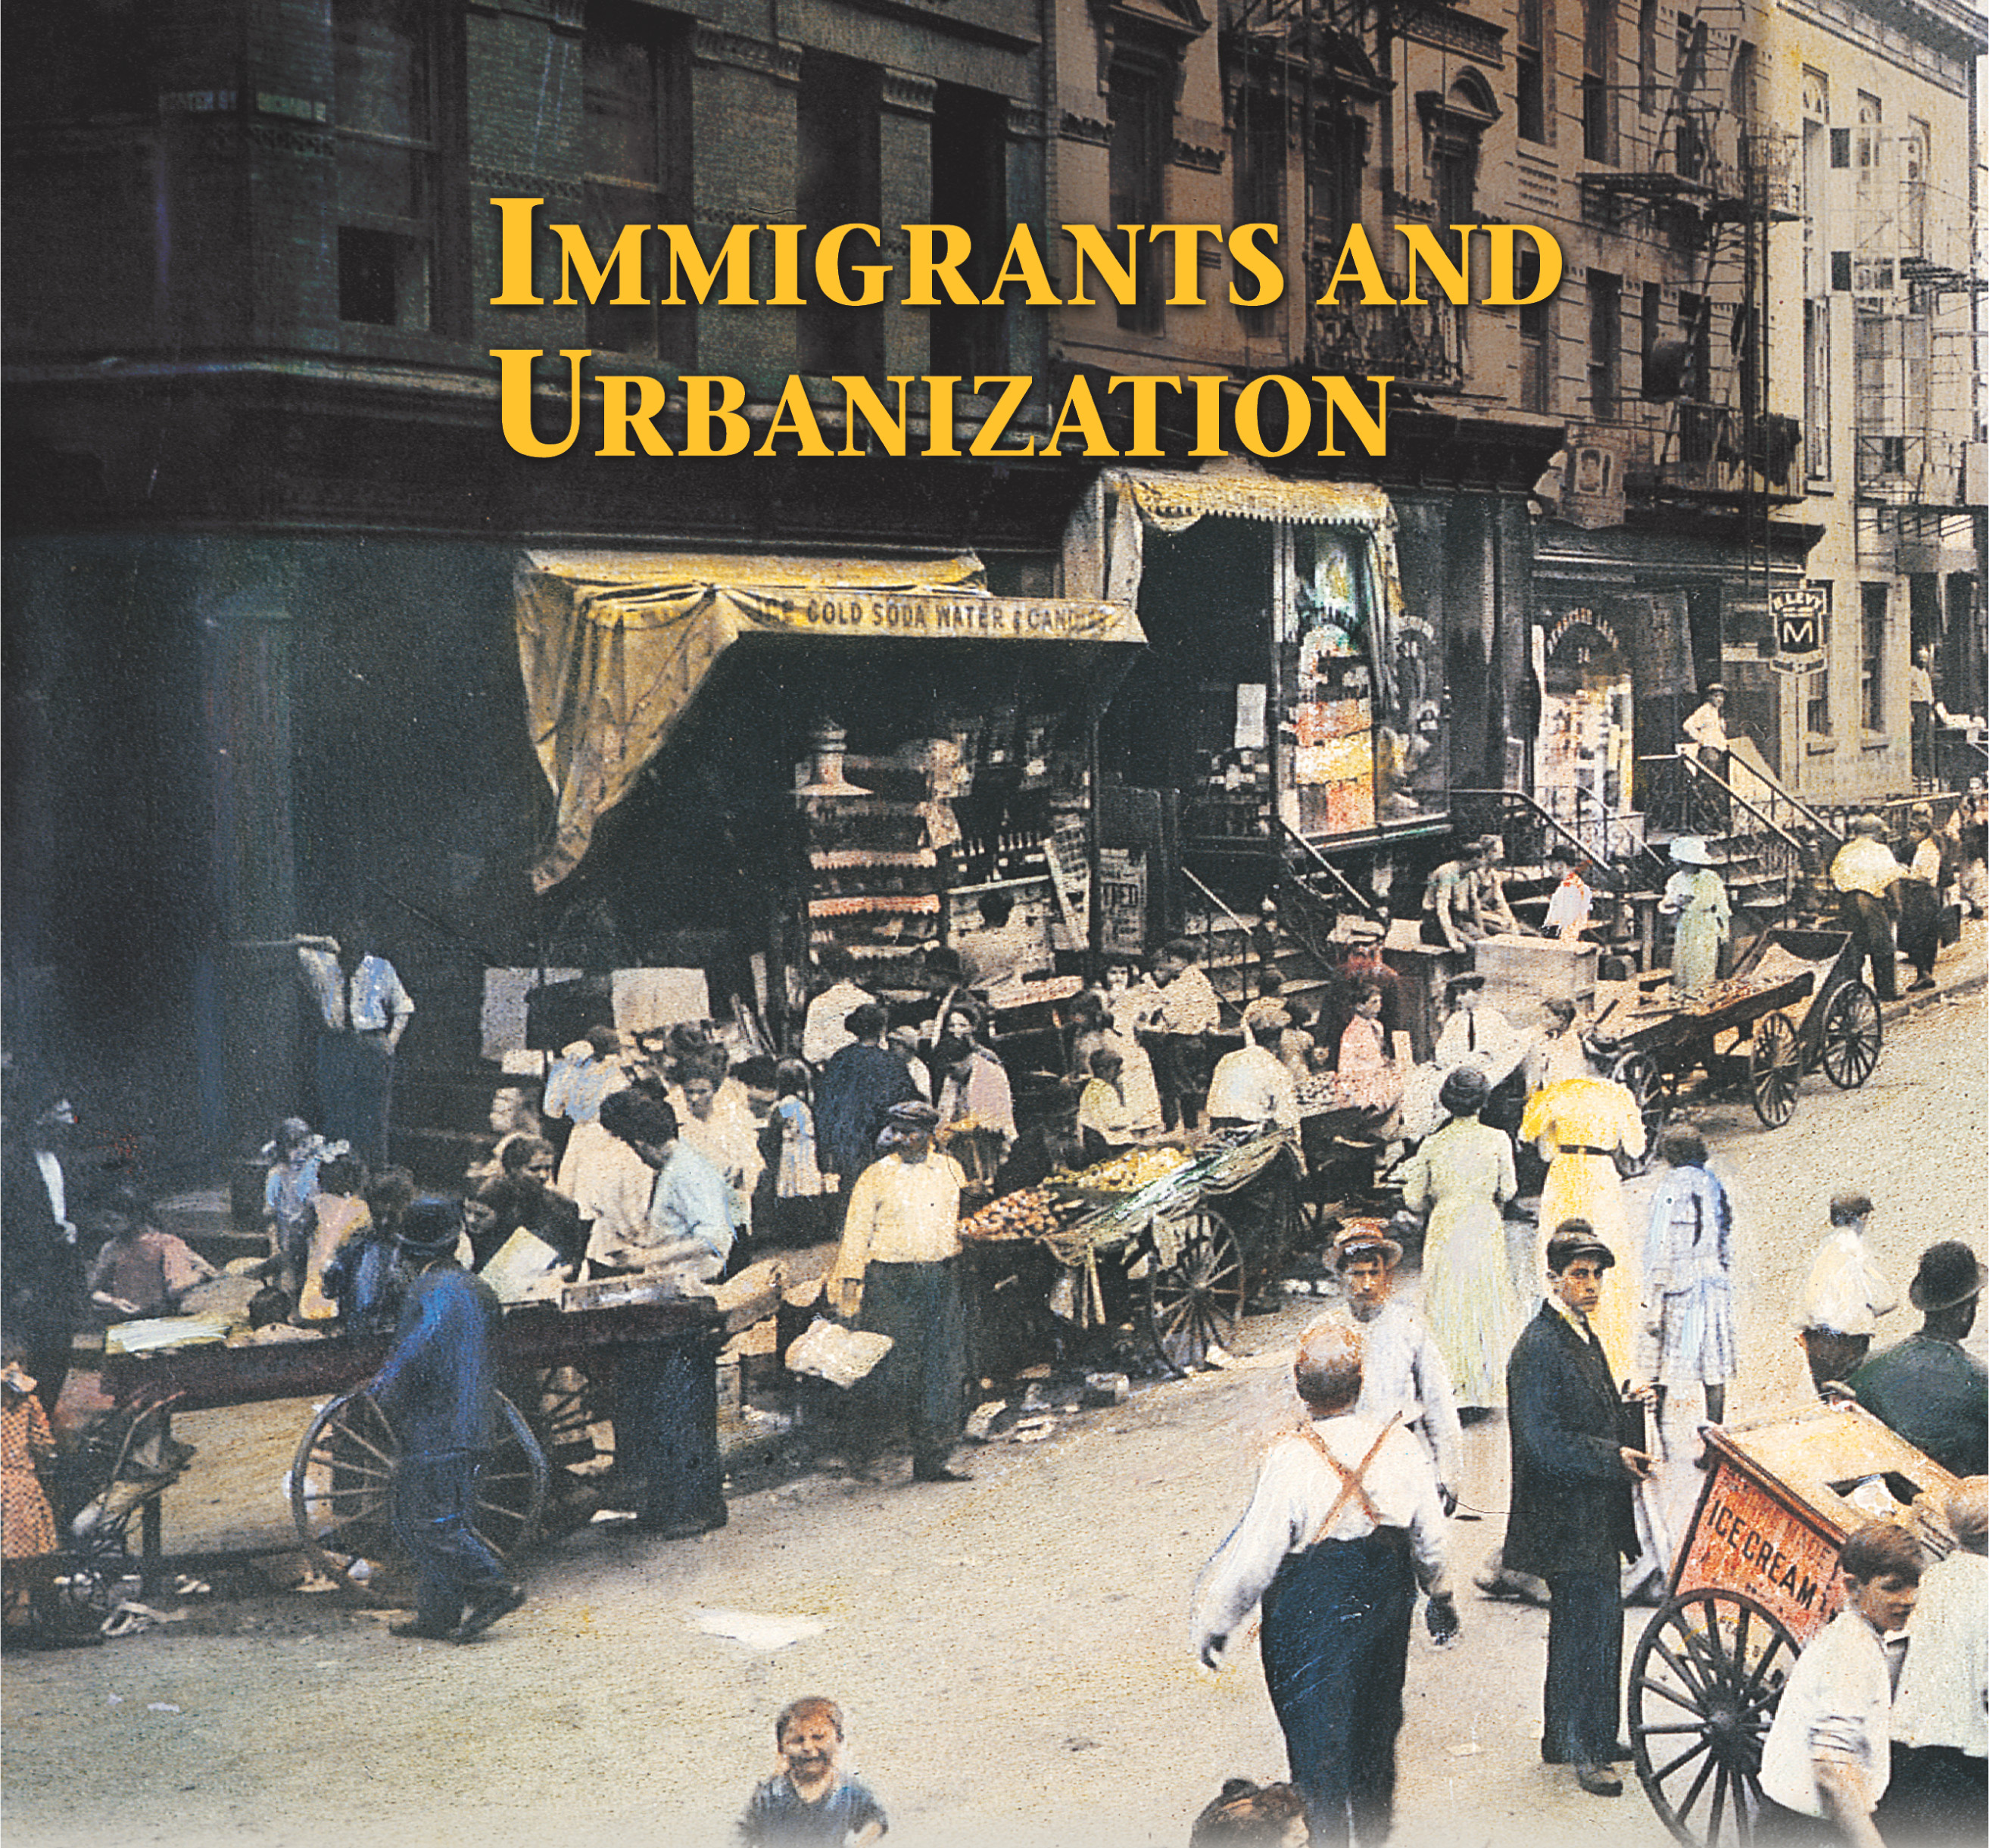 A photo: pedestrians crowd around vendor's carts on a busy city street. A title: Immigrants and Urbanization.